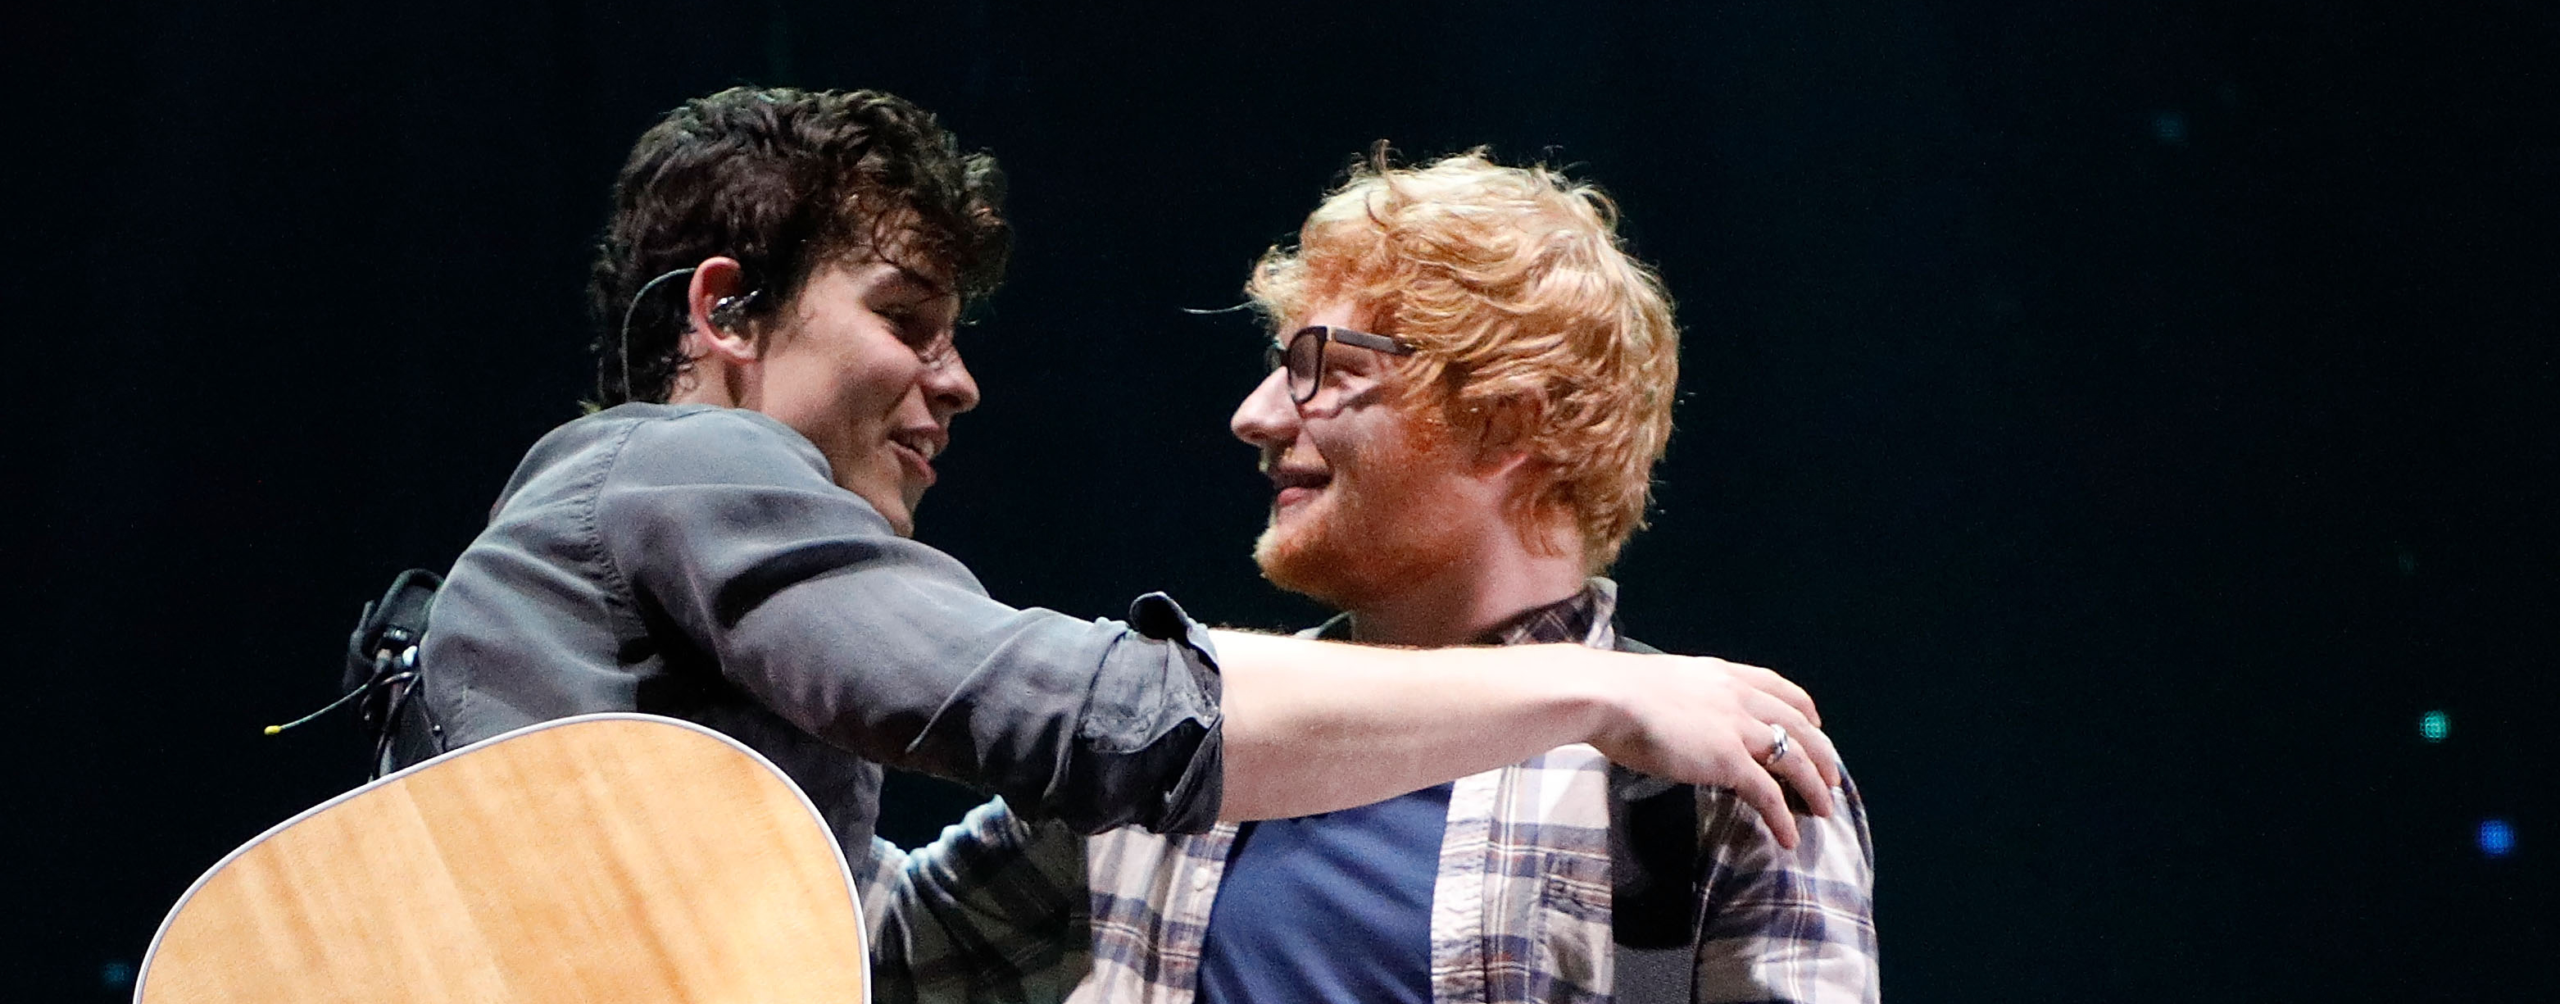 Shawn Mendes and Ed Sheeran performing on stage